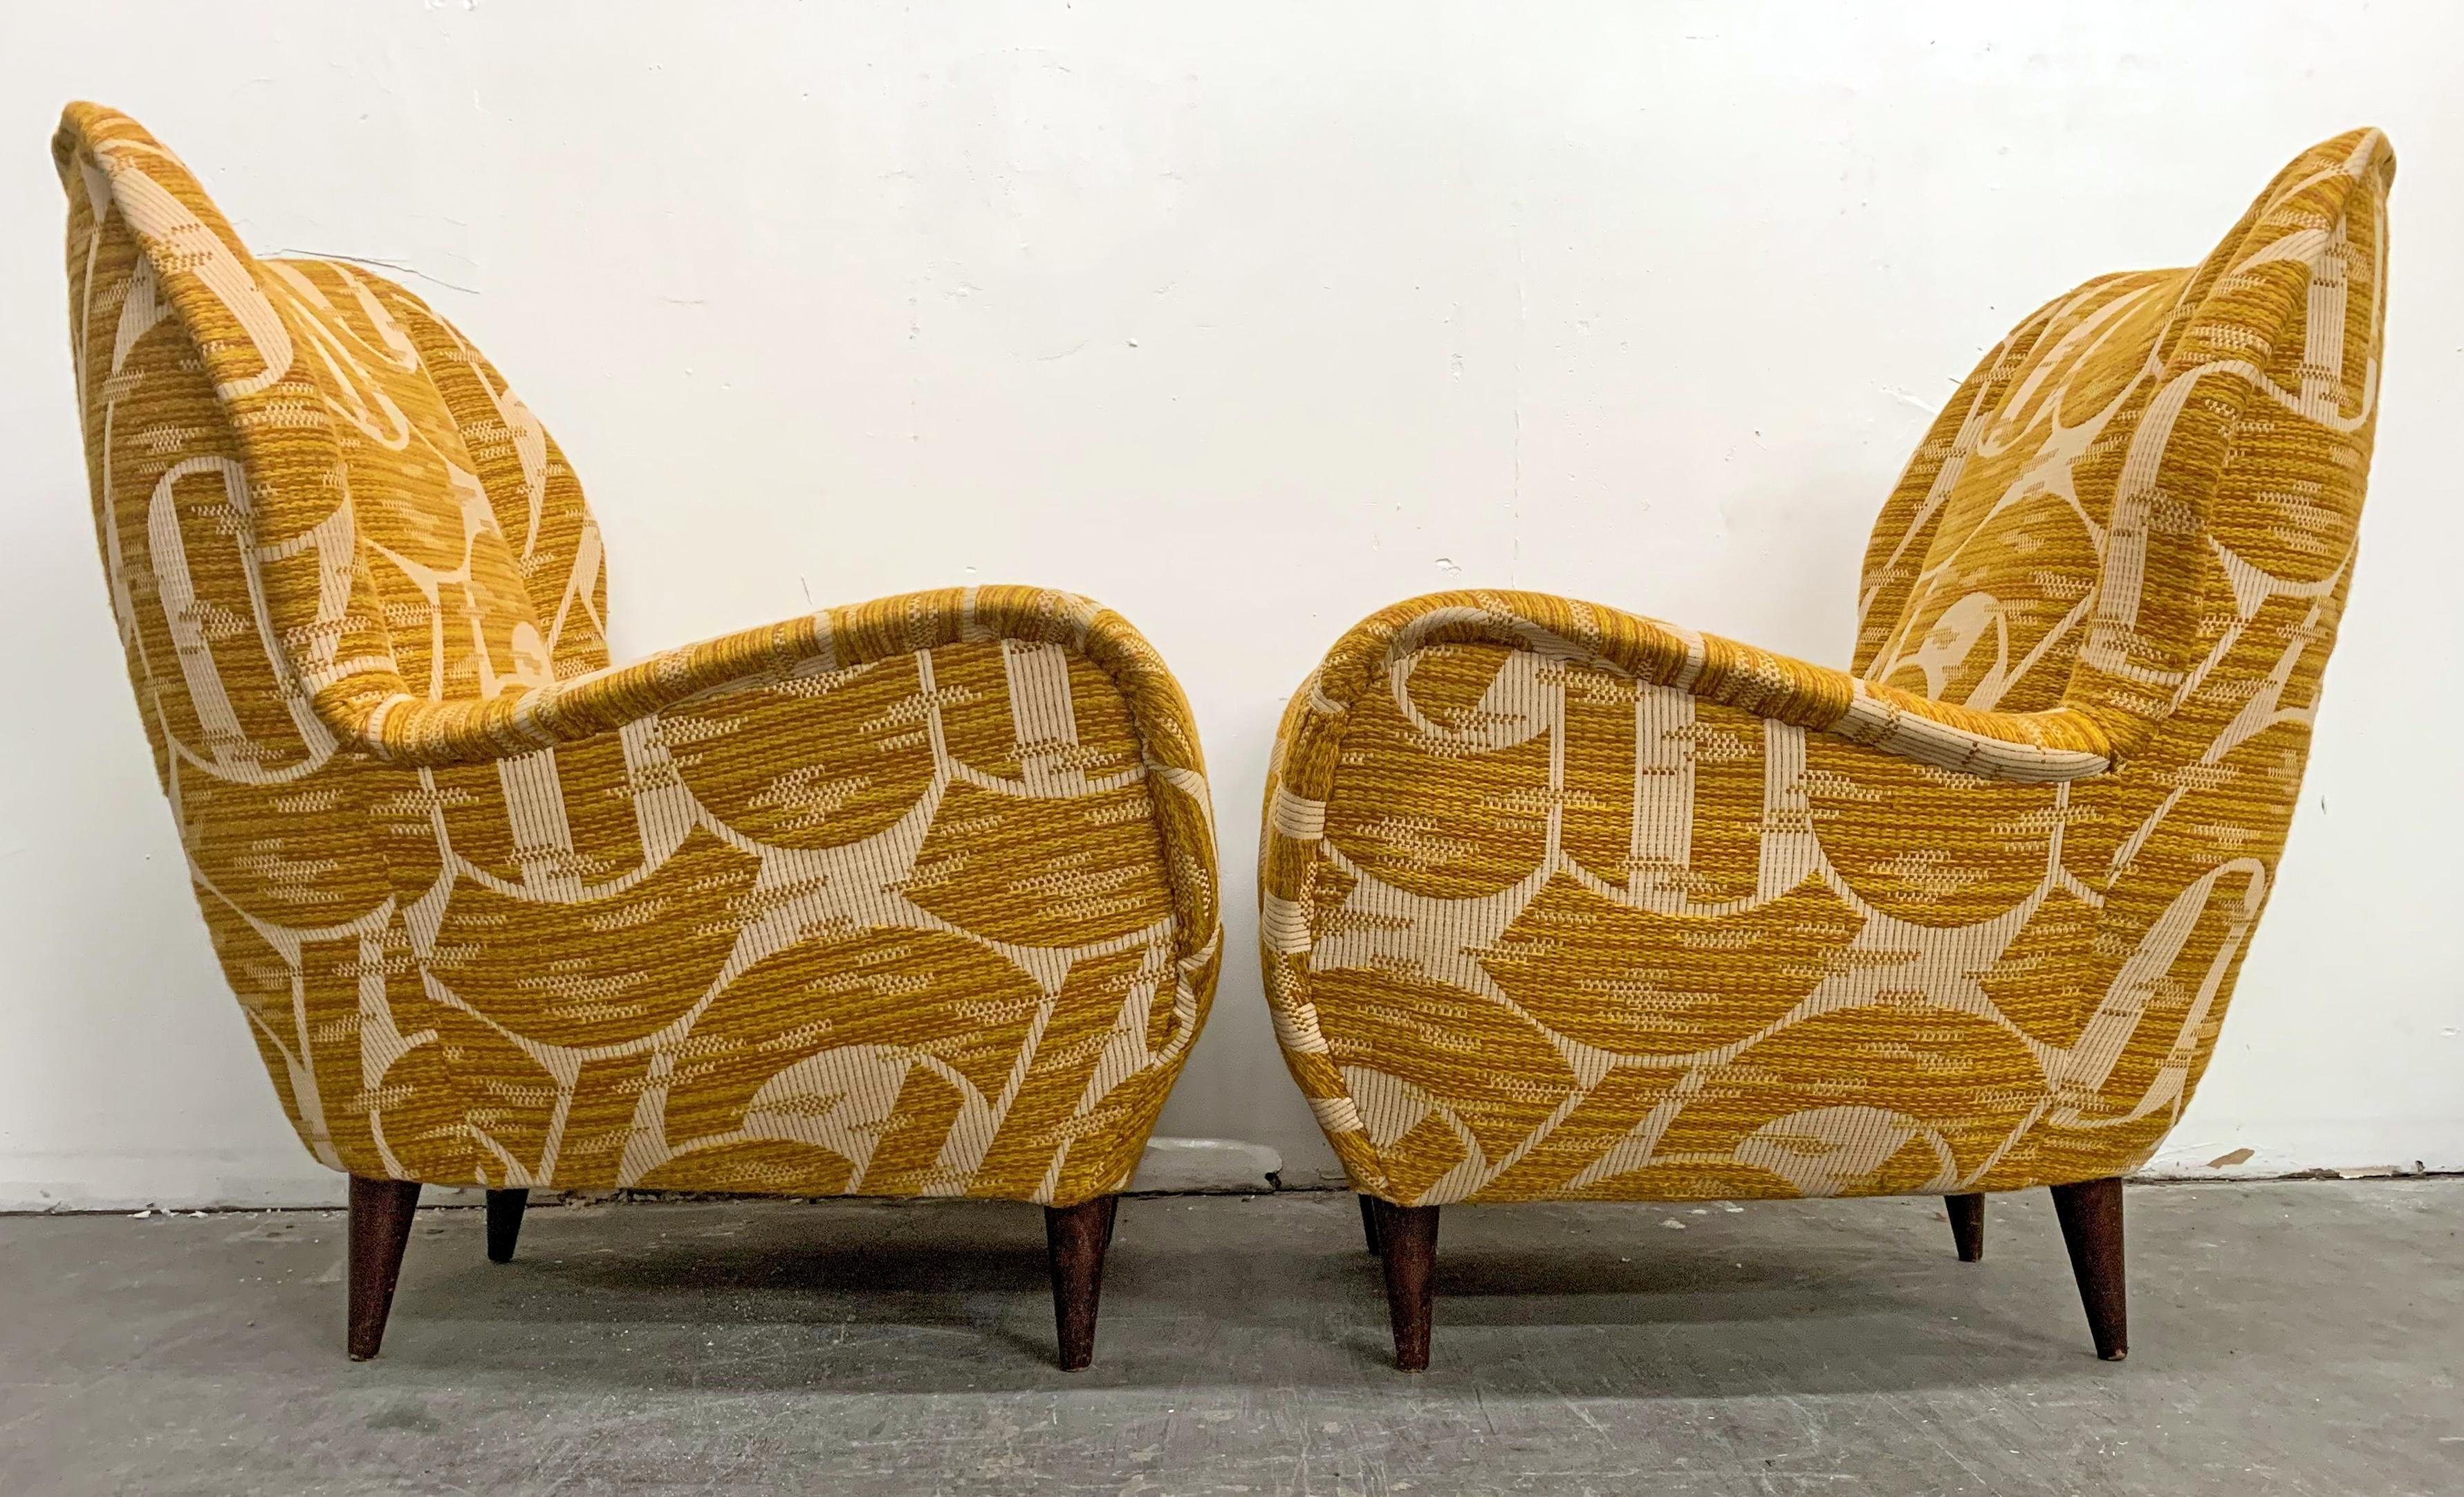 Available right now we have this gorgeous pair of lounge chairs designed in 1950 by Gio Ponti for Edizioni ISA, Bergamo. These chairs feature everything a Mid-Century Modern collector or design aficionado could dream-- swooping curvy lines, a